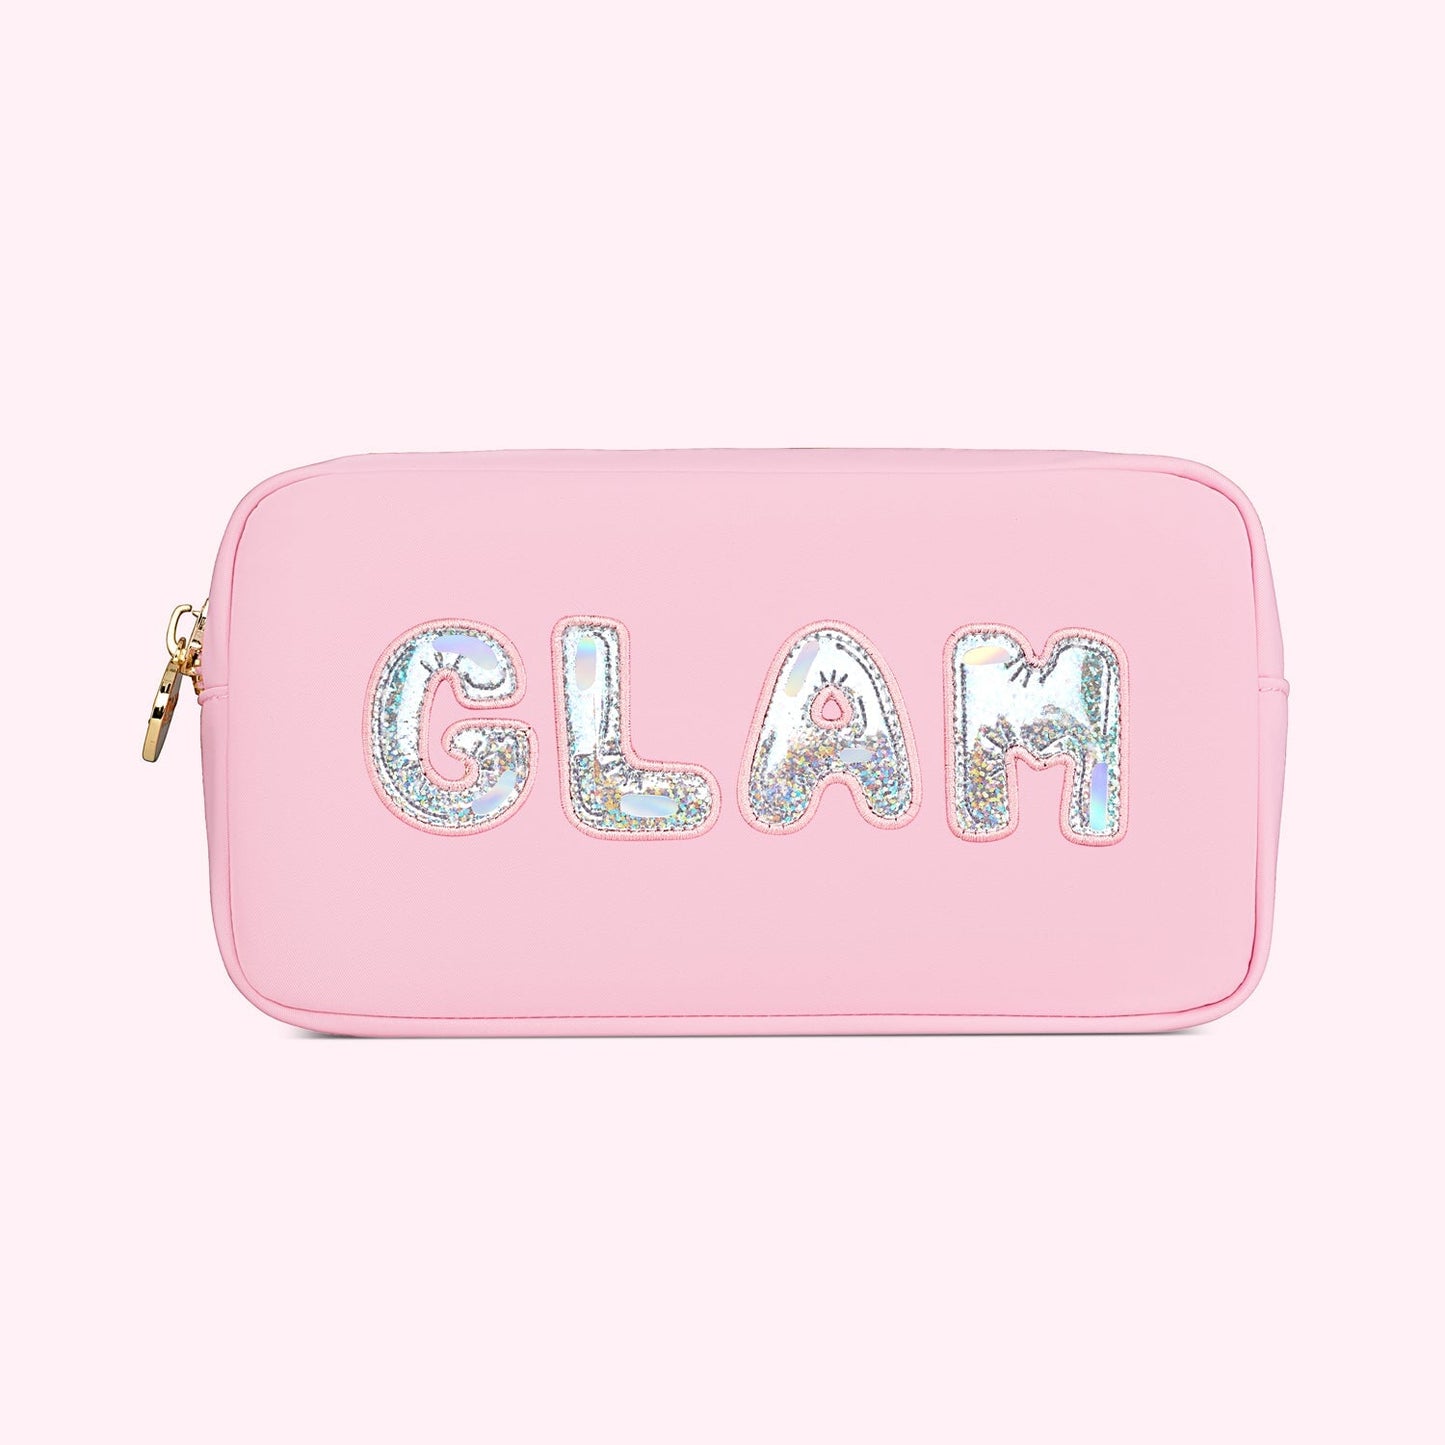 Glam Small Pouch